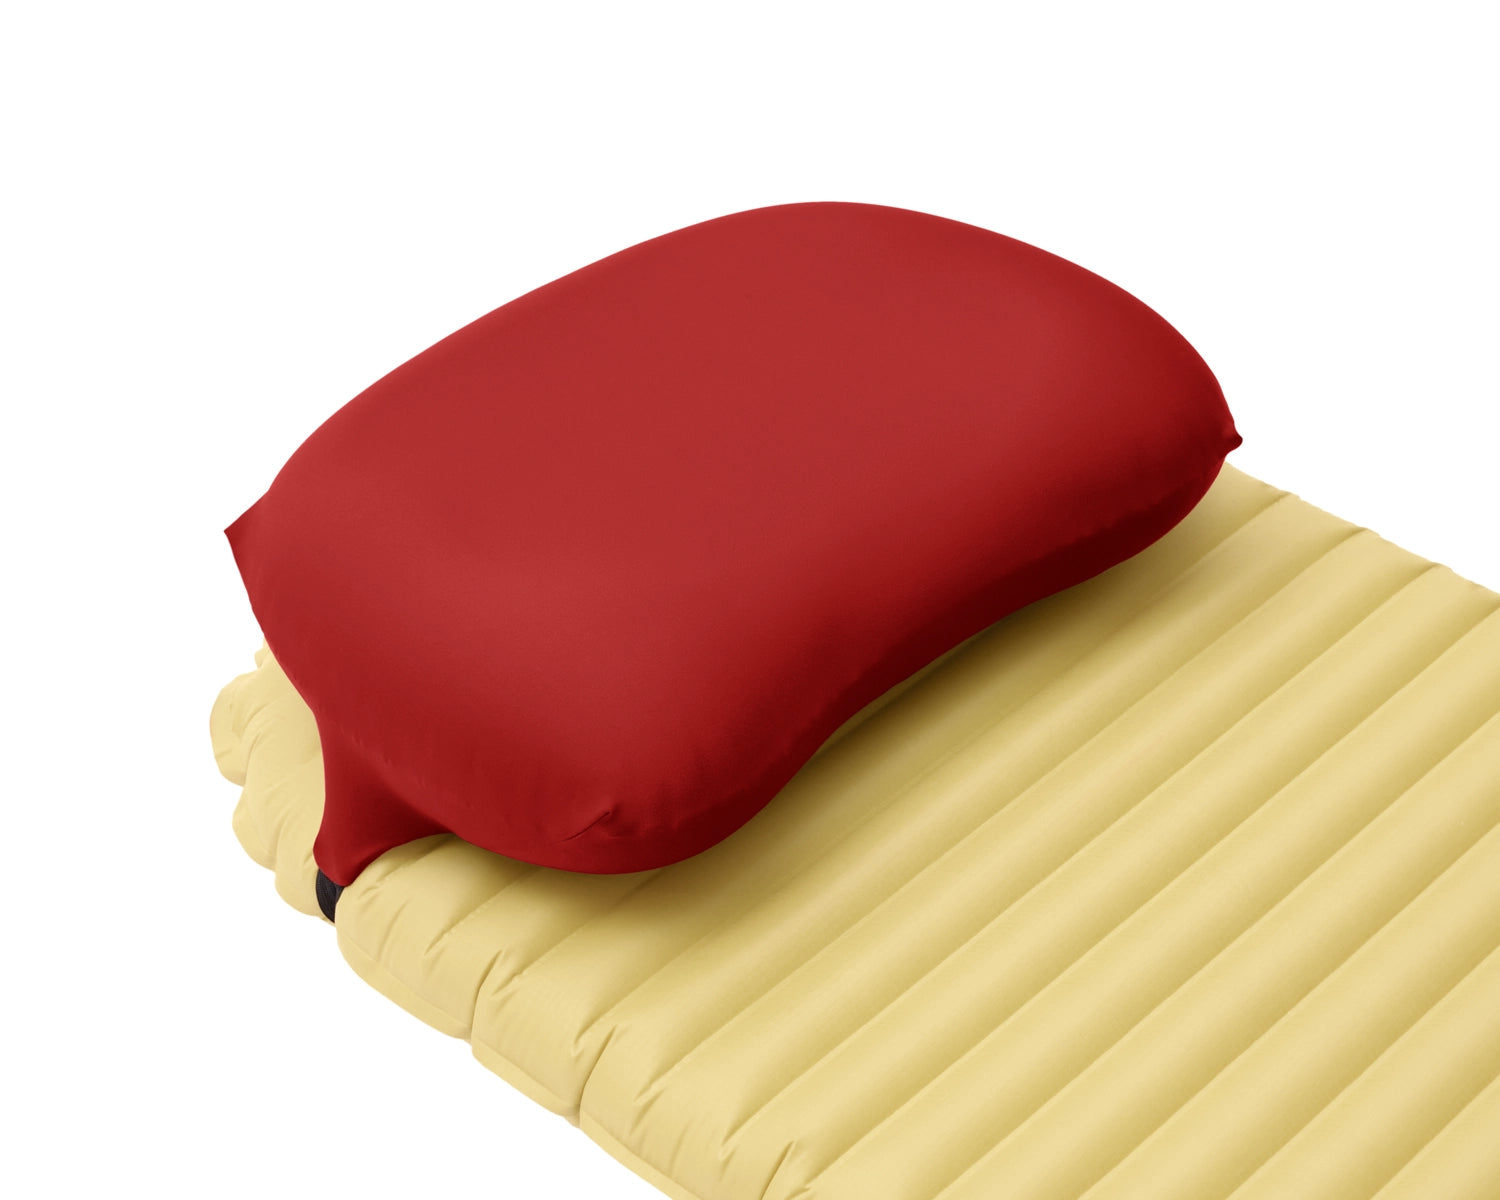 Pillow Strap medium in red side view. Backpacking pillowcase for attaching to a sleeping pad for better sleep camping.